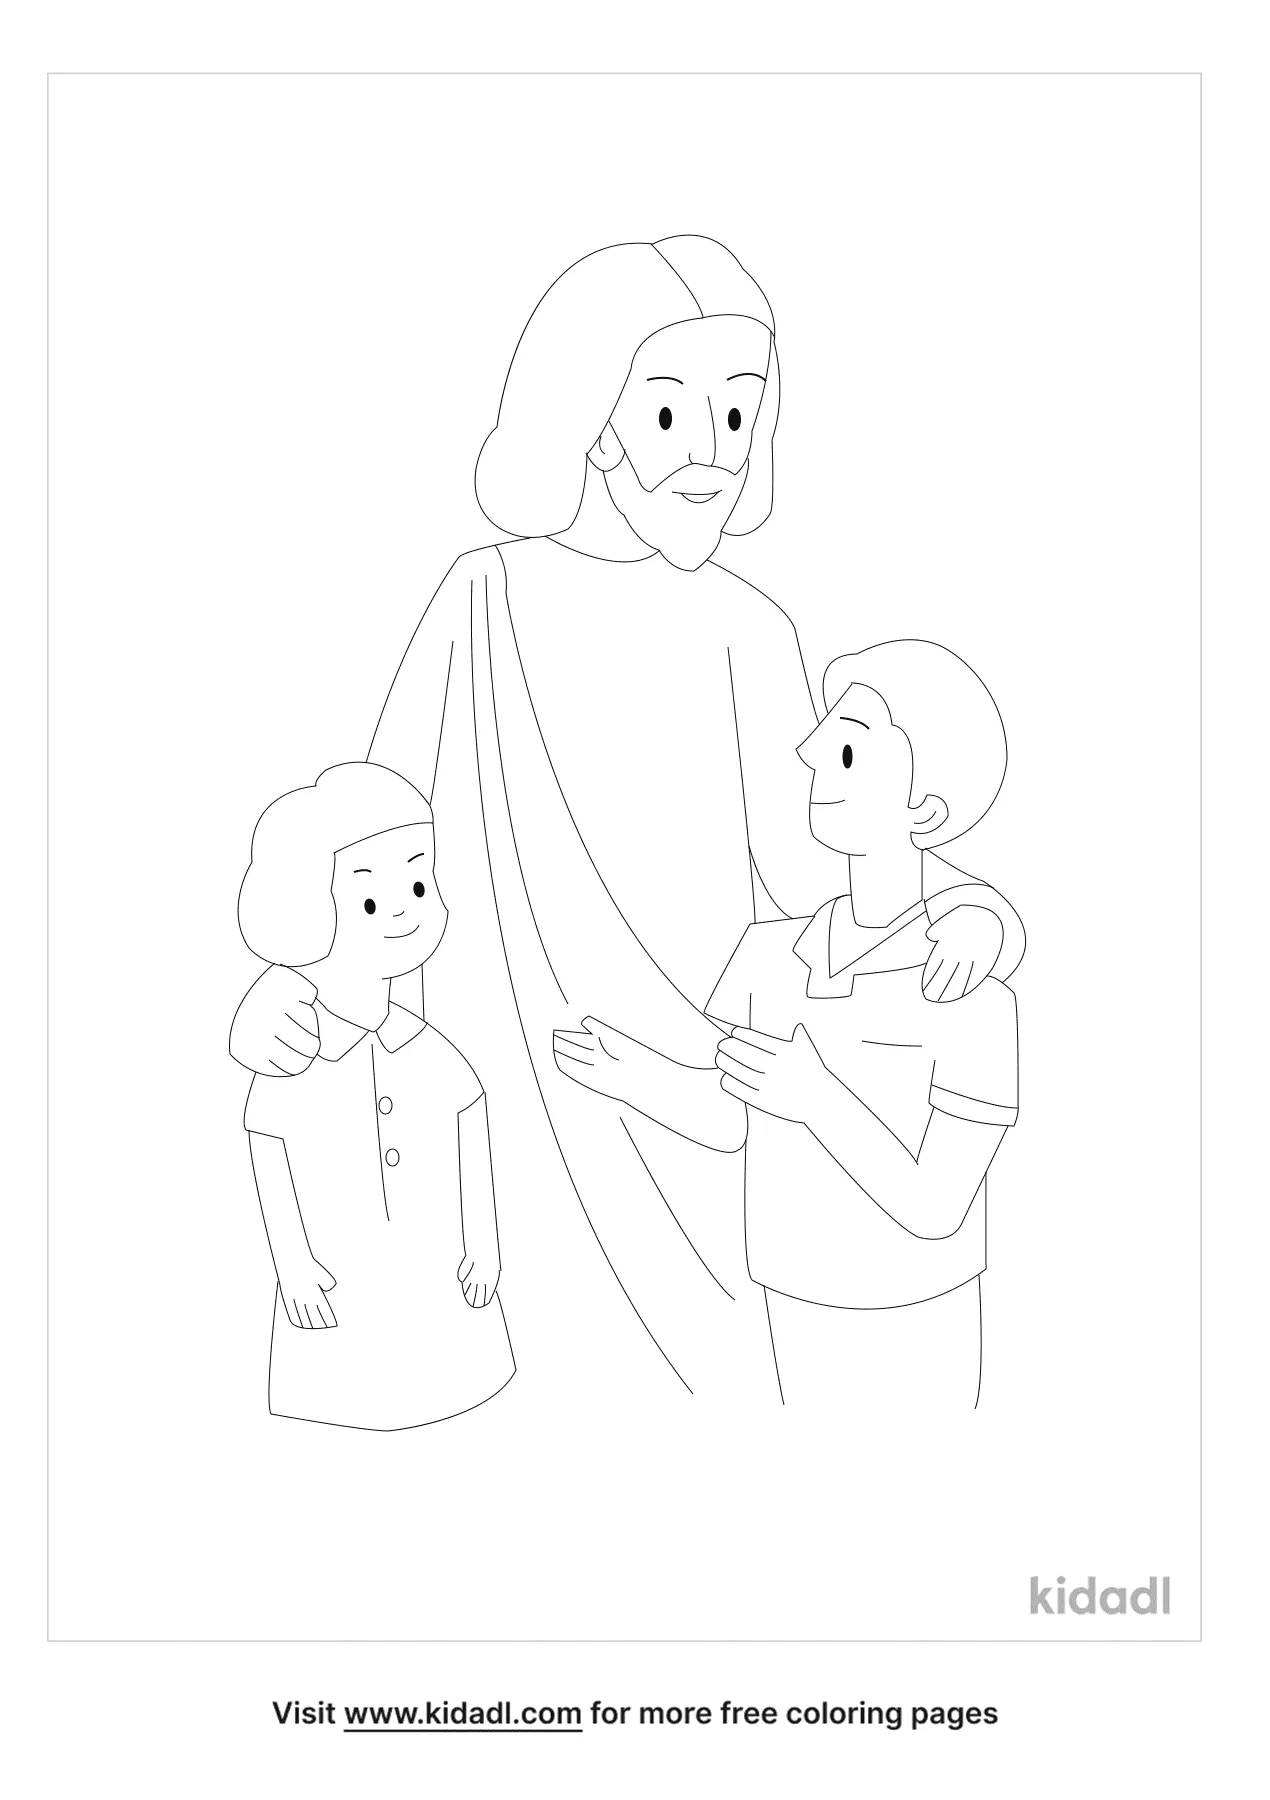 telling others about jesus coloring pages